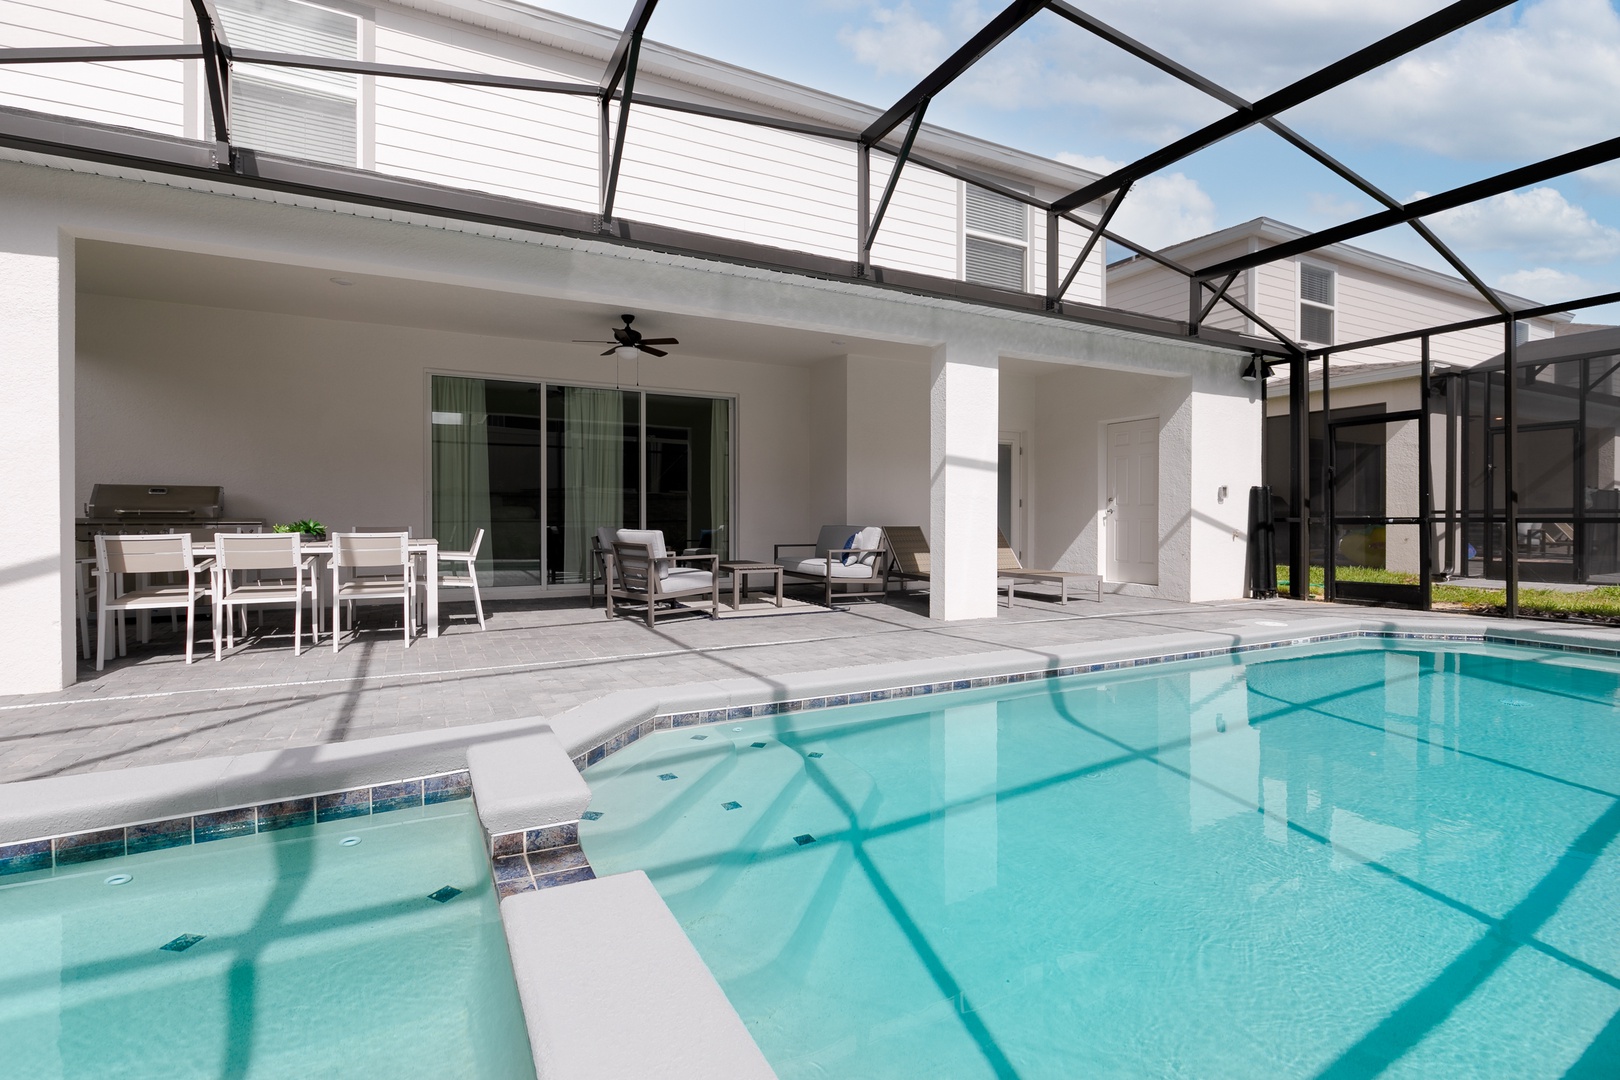 Lounge the day away or make a splash in your own private, covered pool!